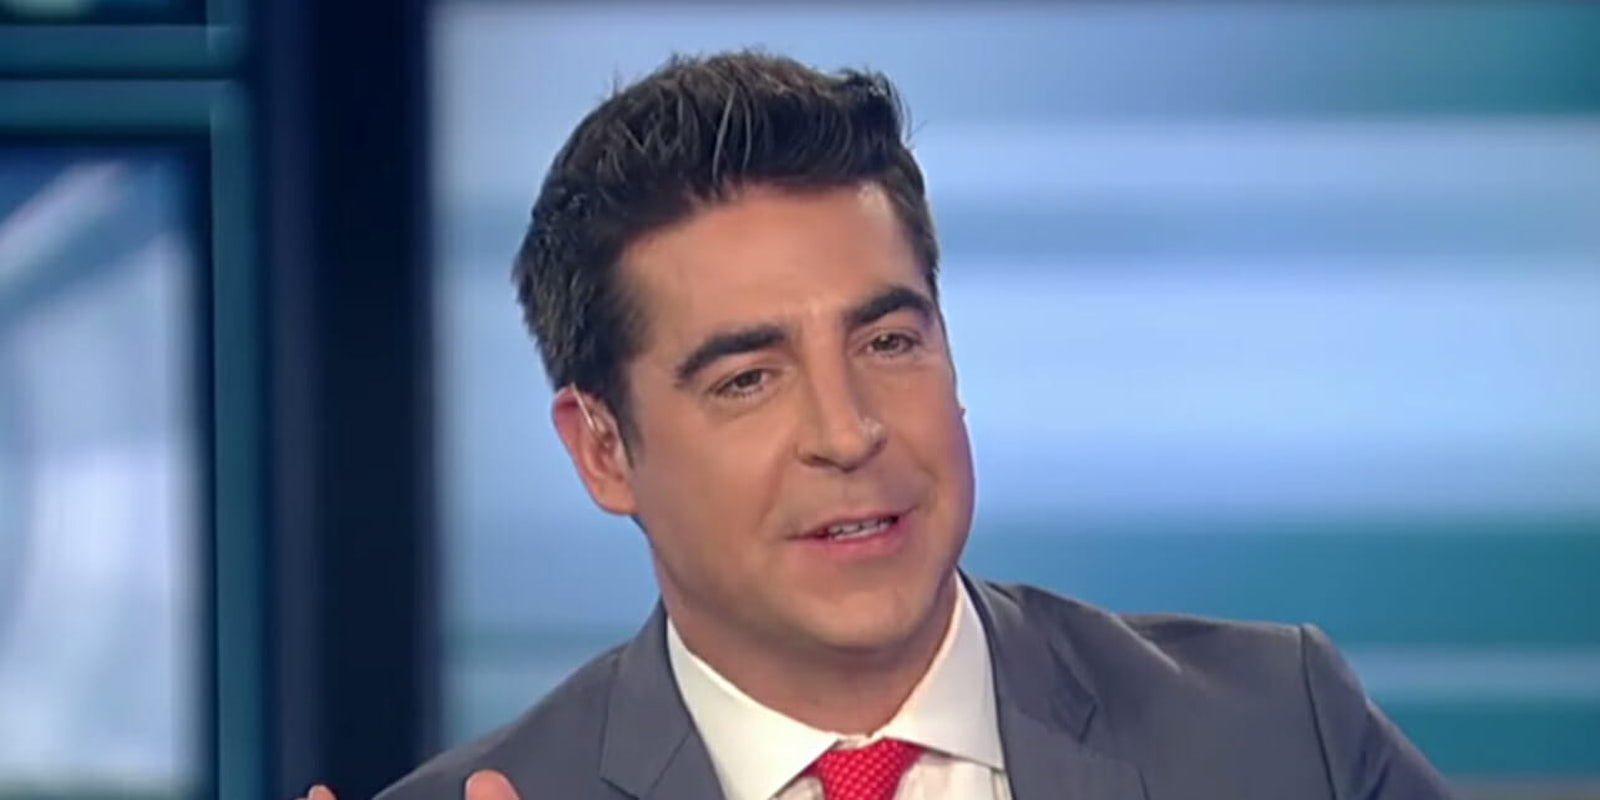 Jesse Watters defended Donald Trump claiming the 'pee tape' could not possibly be real because someone would have to sleep in a wet bed afterwards.